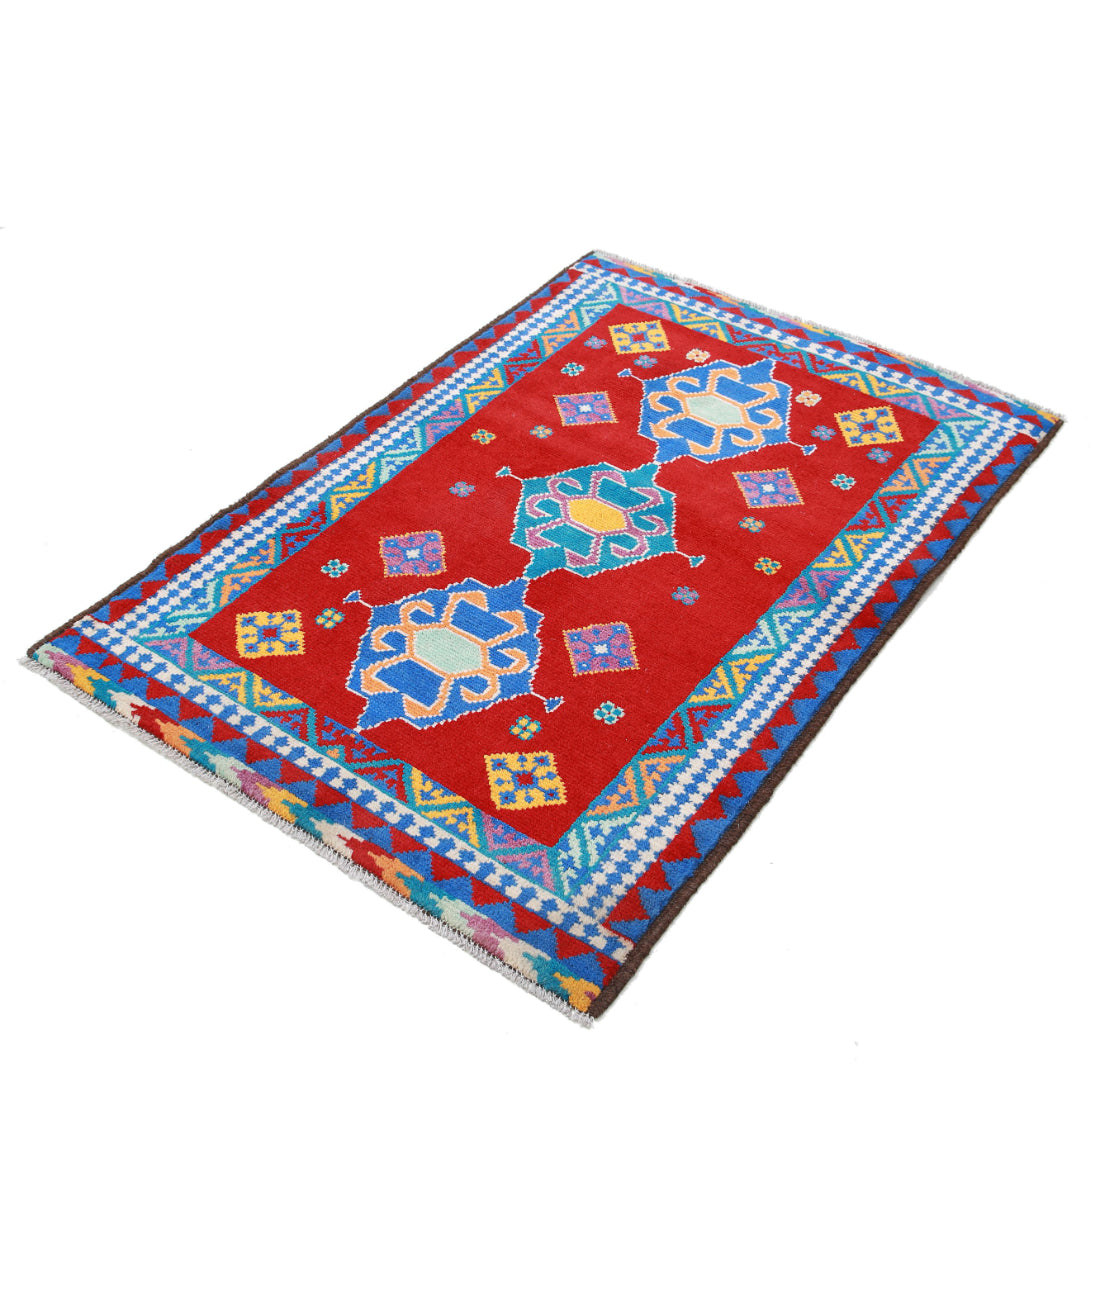 Revival 3'0'' X 4'10'' Hand-Knotted Wool Rug 3'0'' x 4'10'' (90 X 145) / Red / Blue